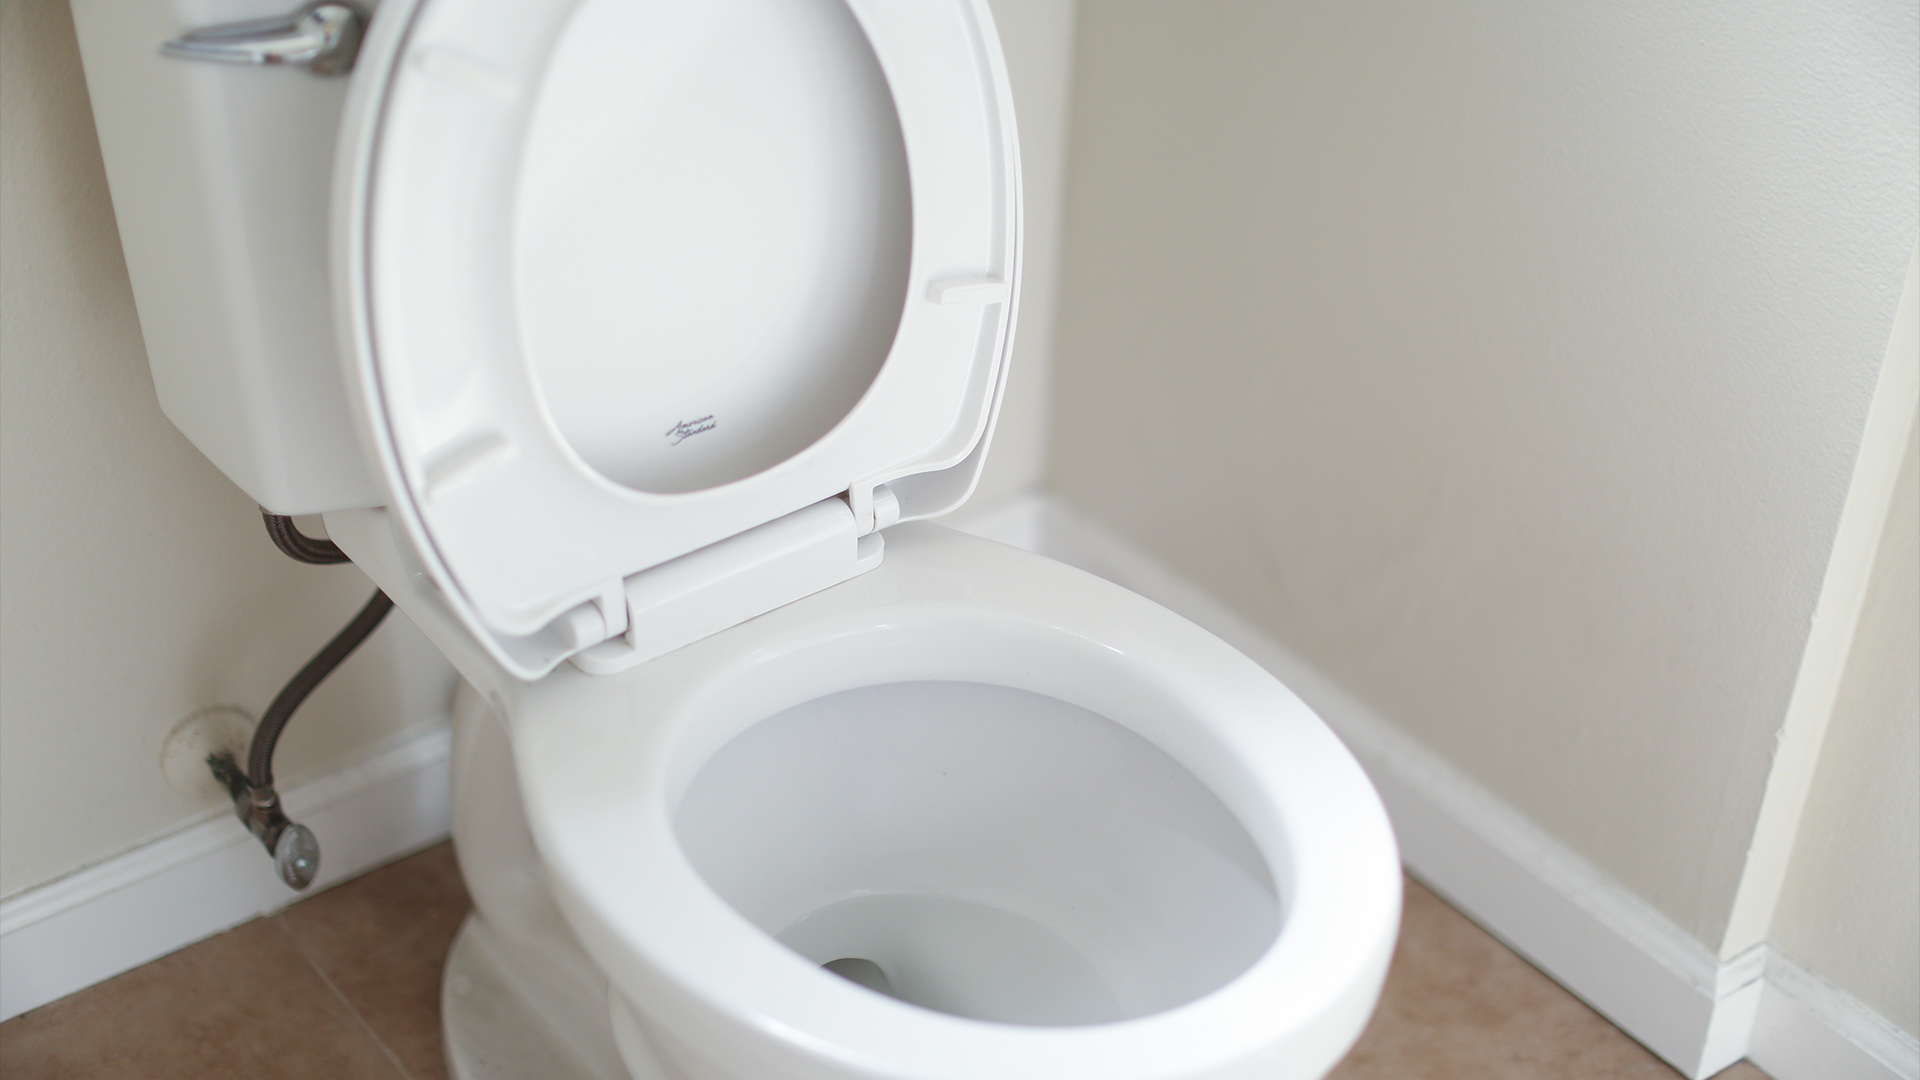 What To Do If You Flush Something Important Down The Toilet